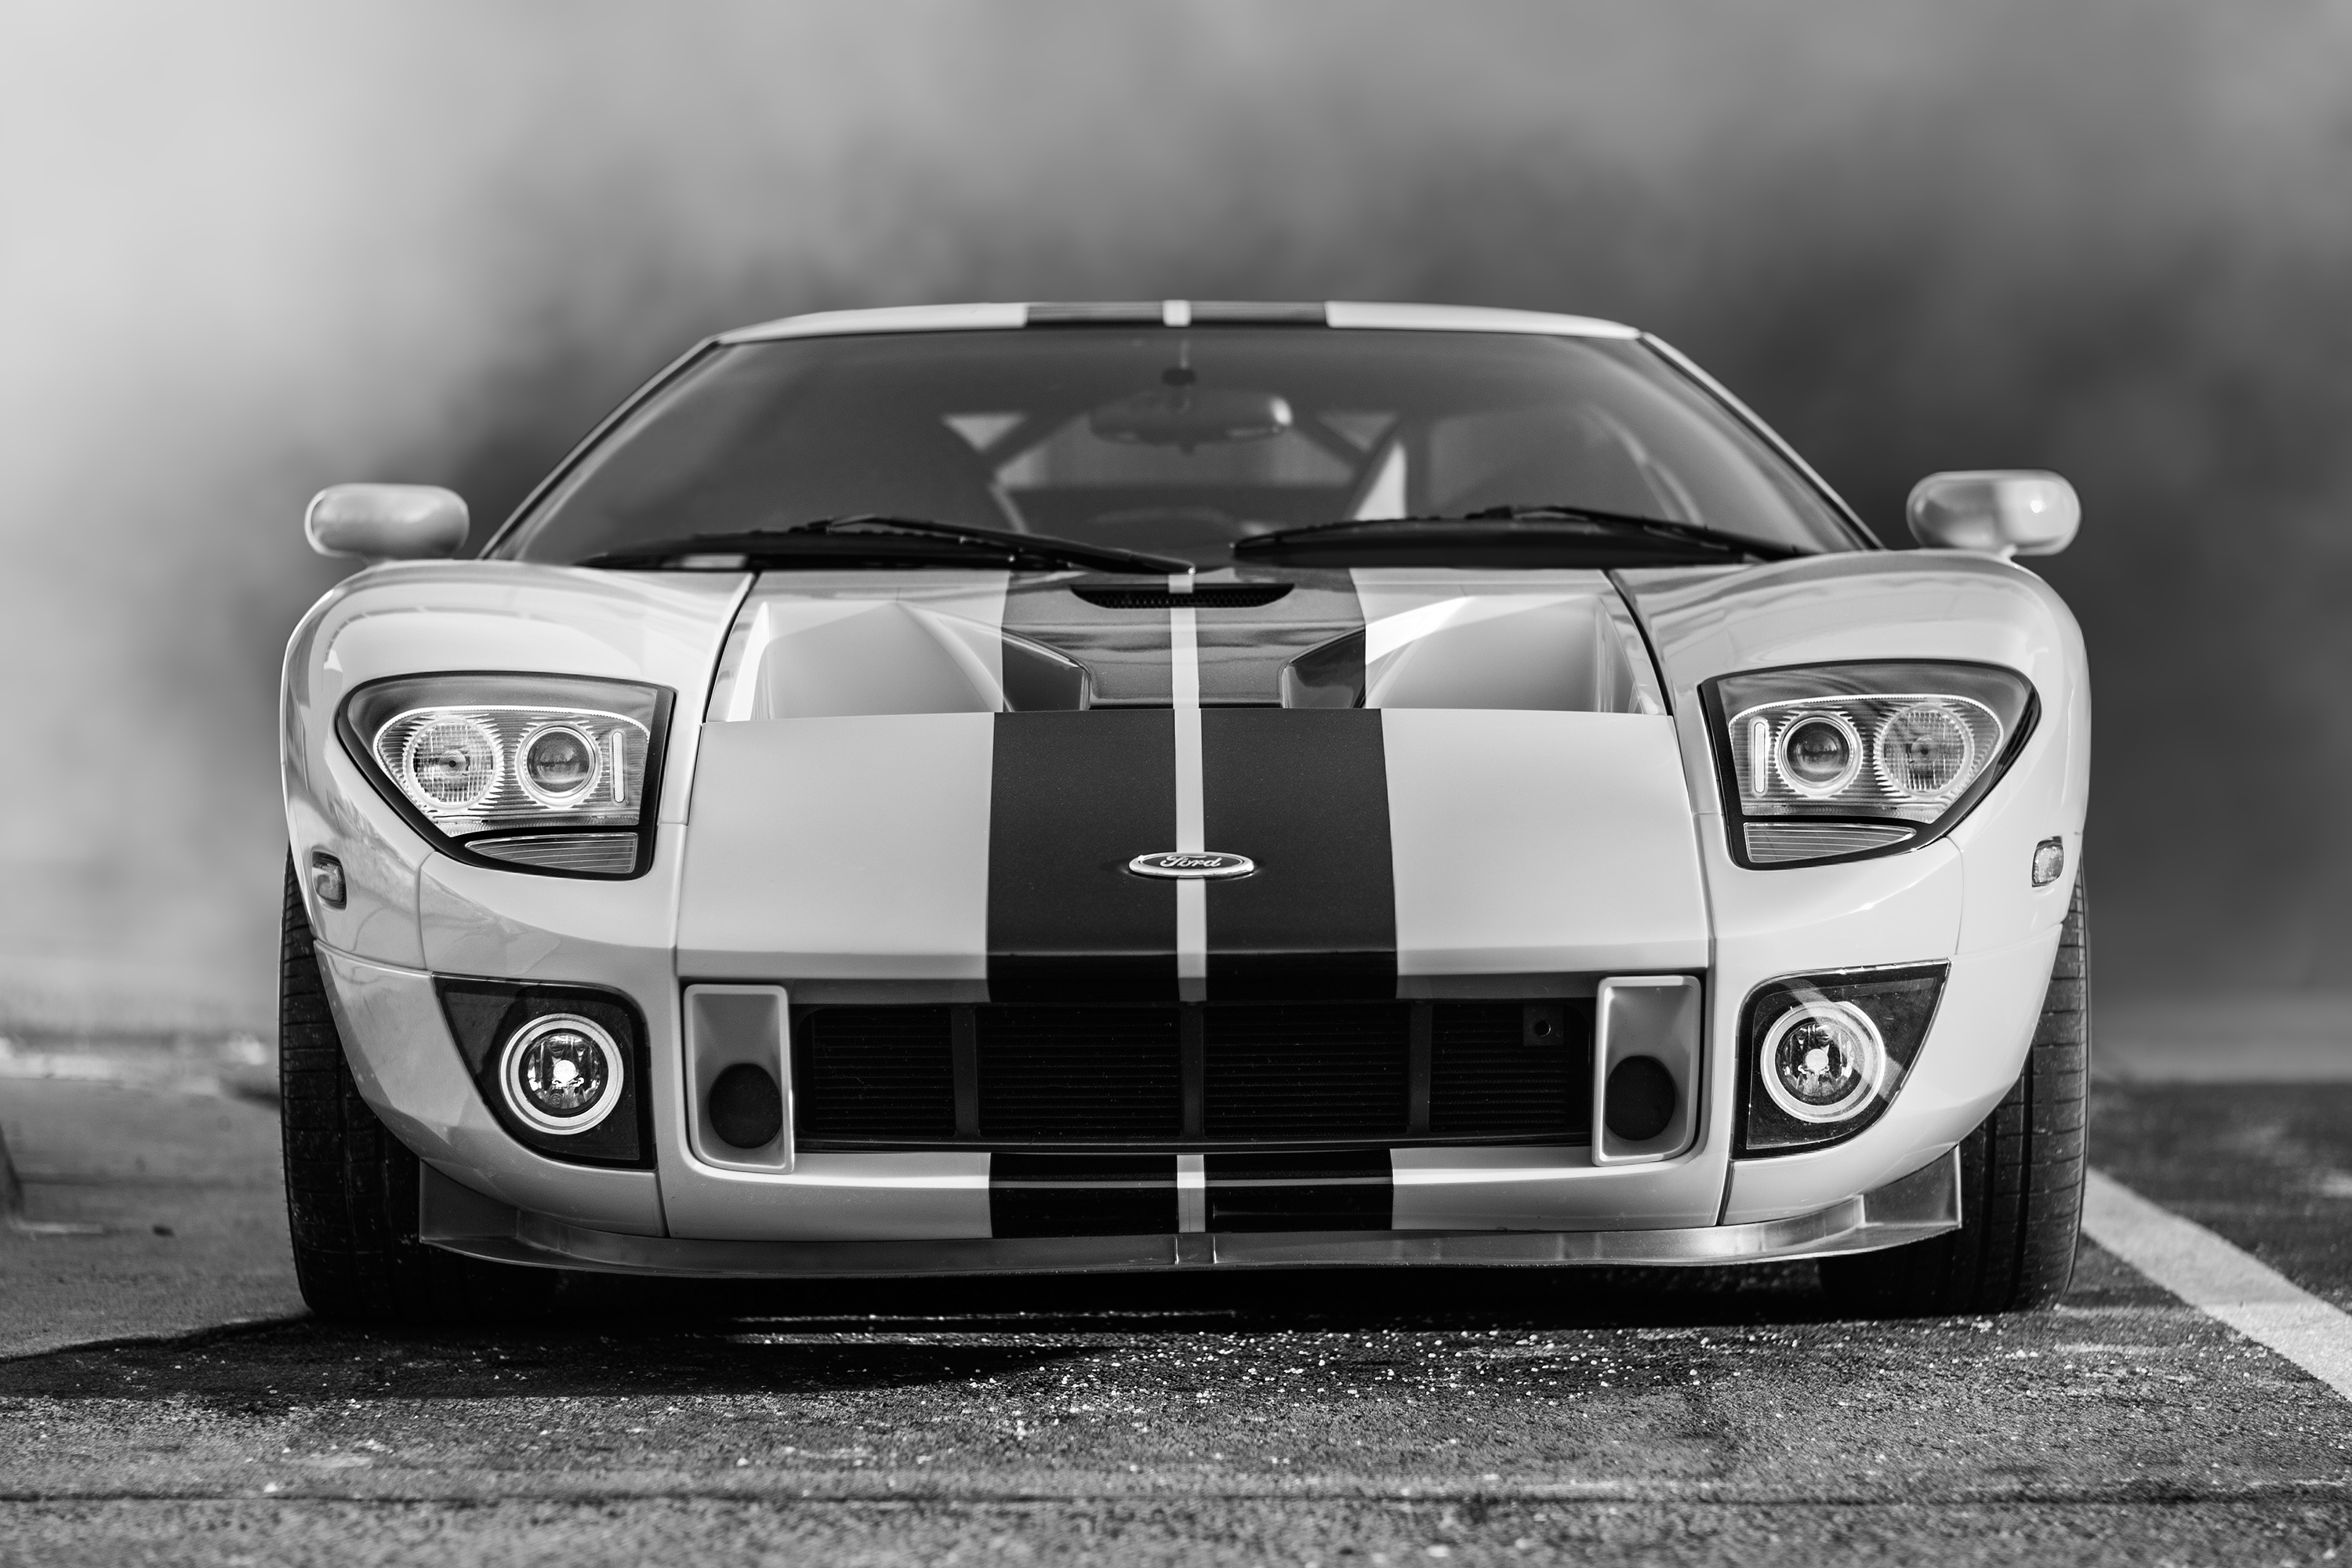 cars, chb, lights, ford, bw, headlights, ford gt Free Stock Photo